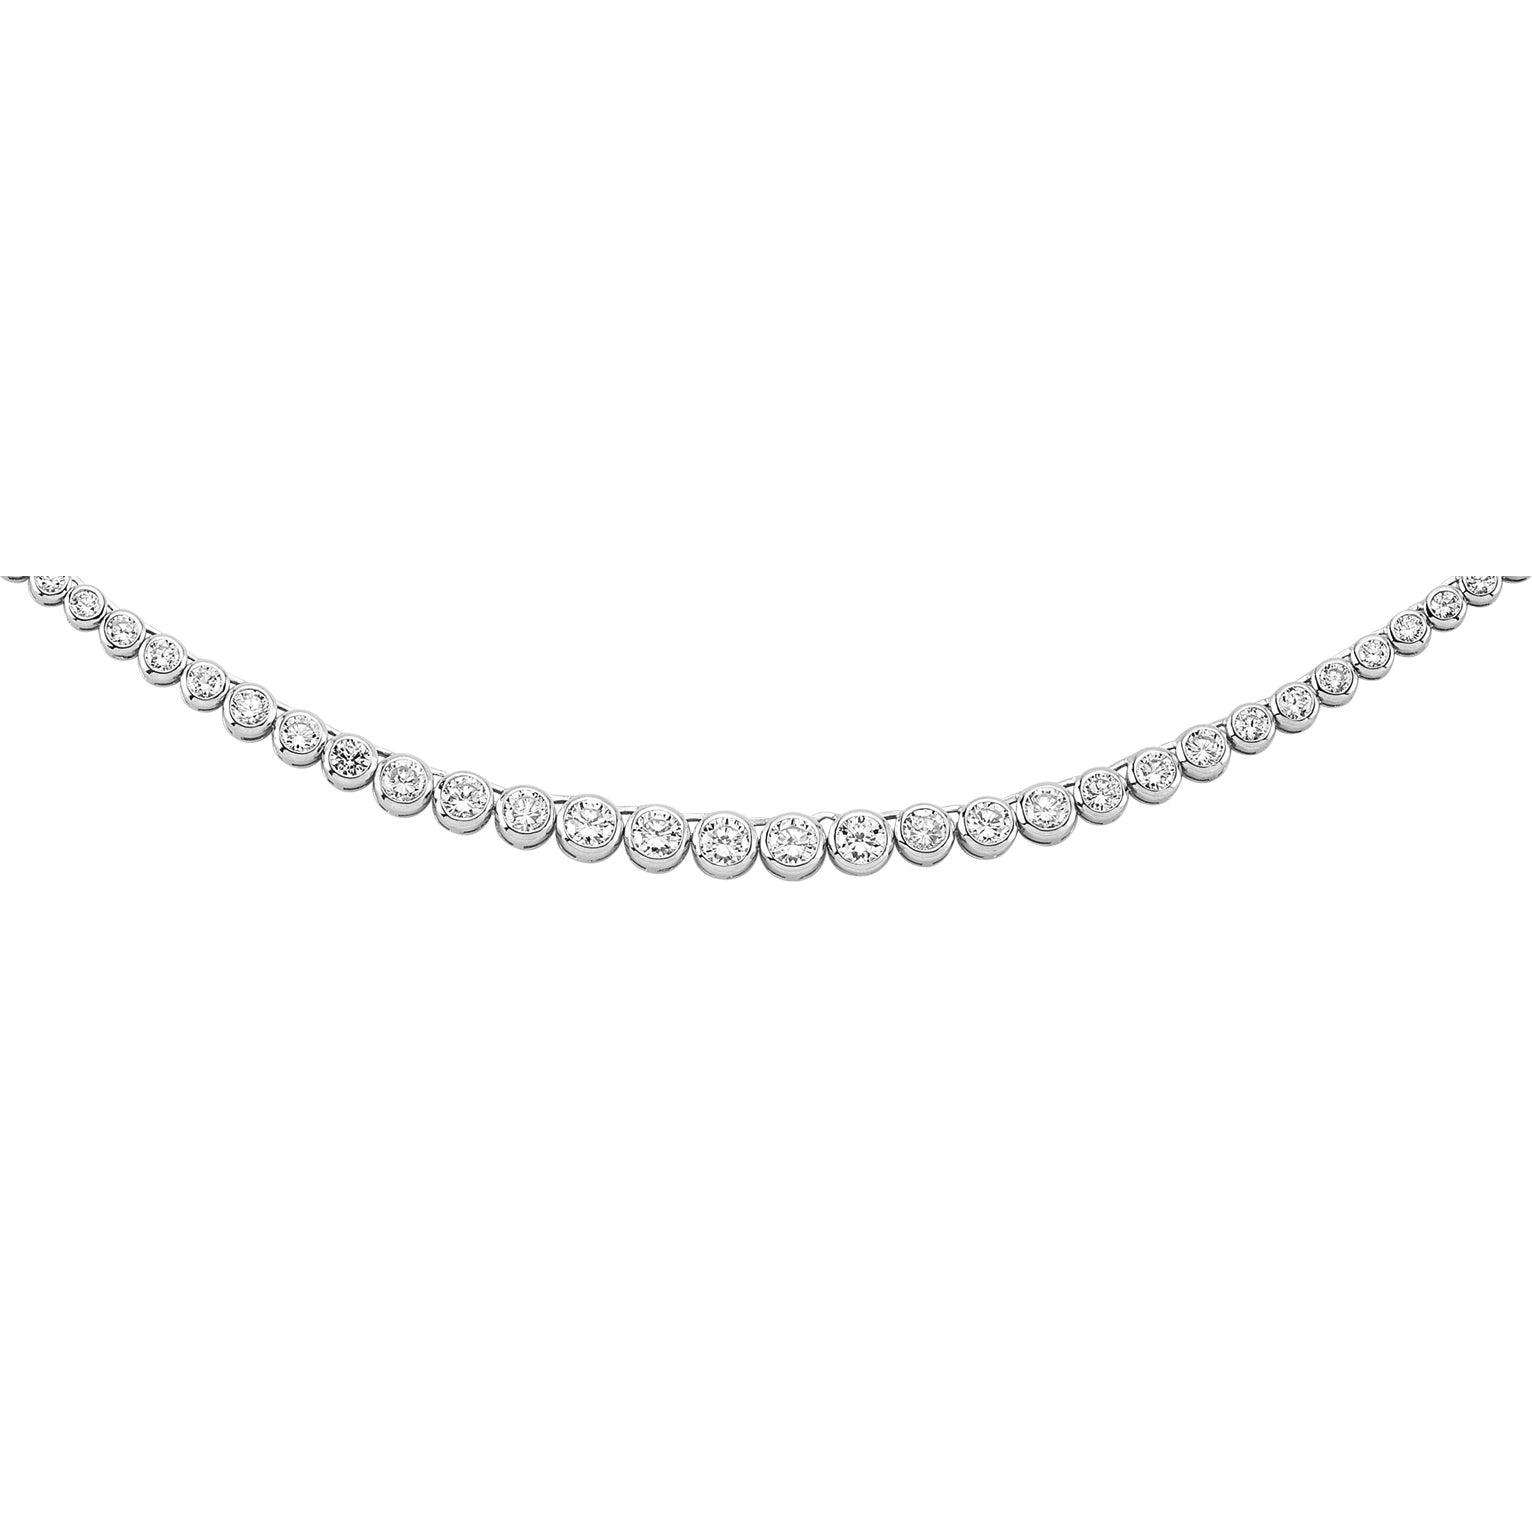 Silver  CZ Graduated Eternity Tennis Necklace 6mm 16 inch - GVK094